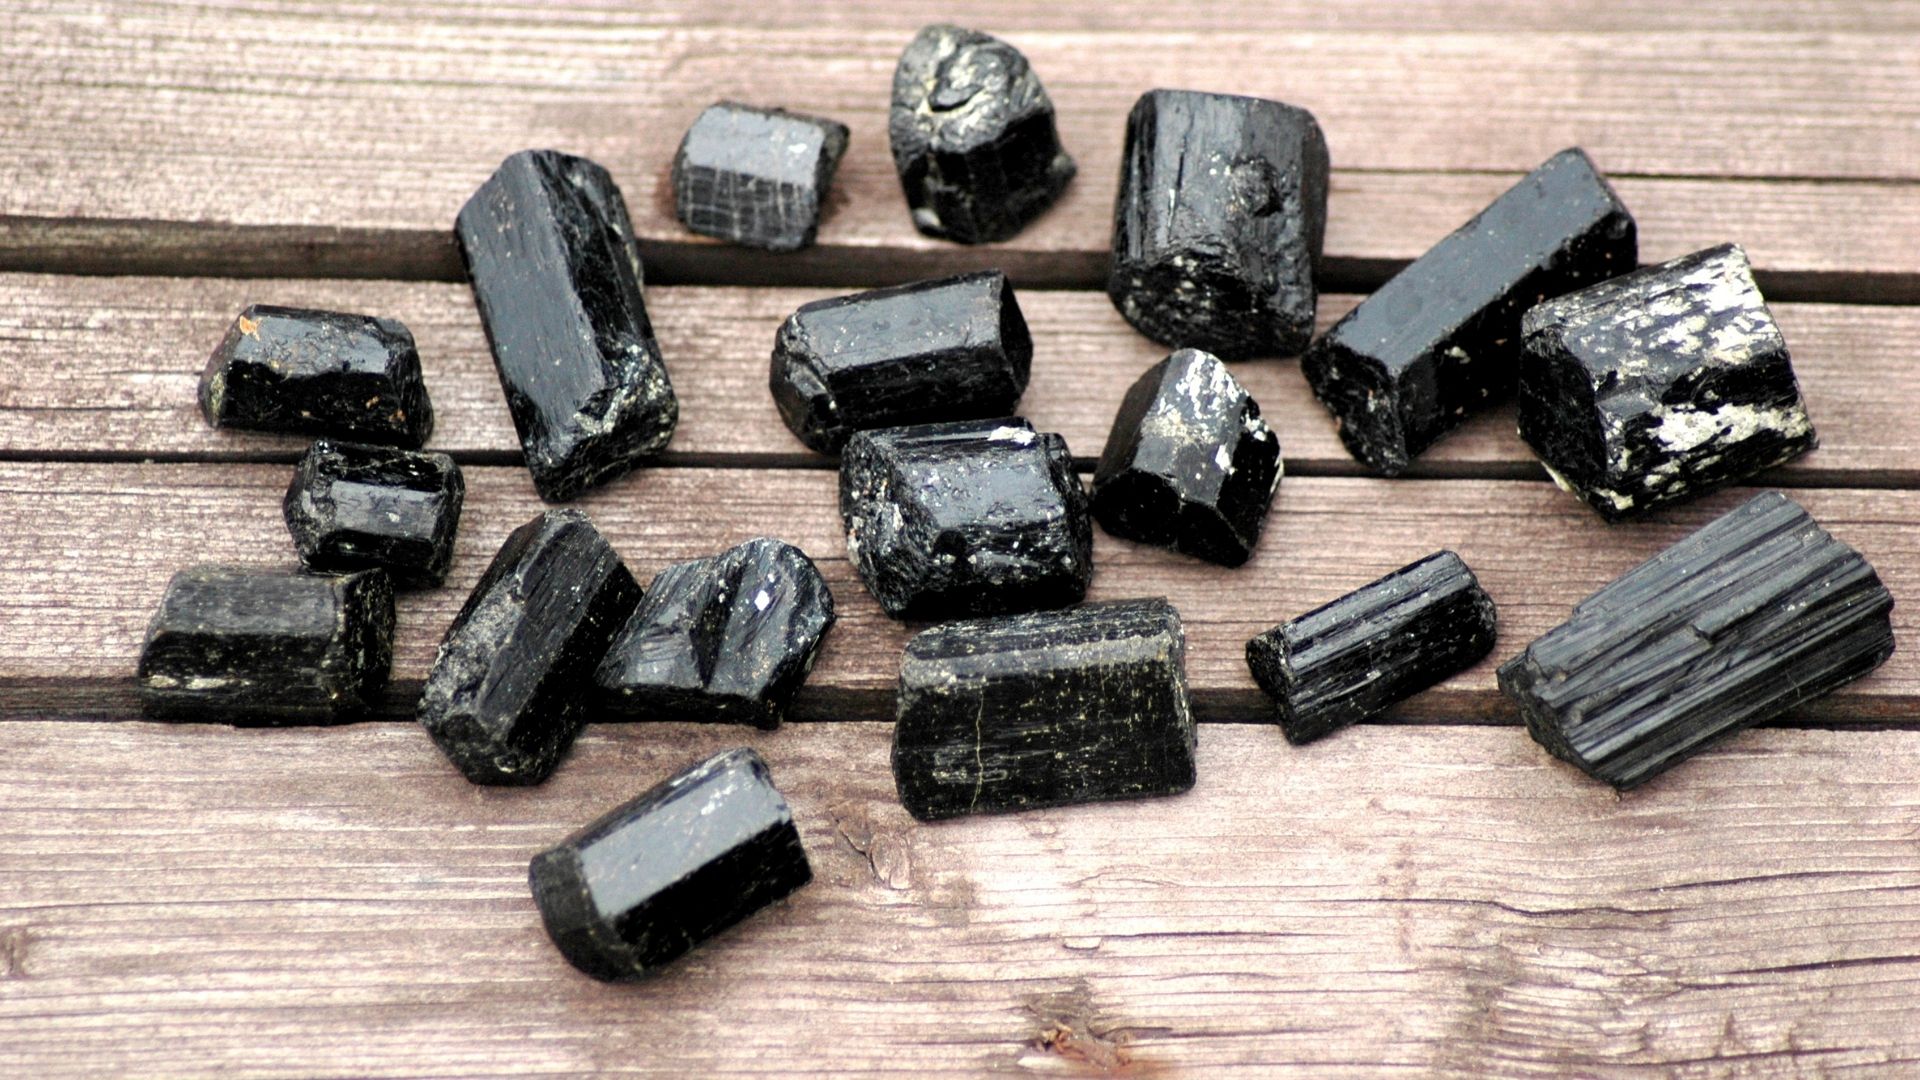 Black Tourmaline For Protection